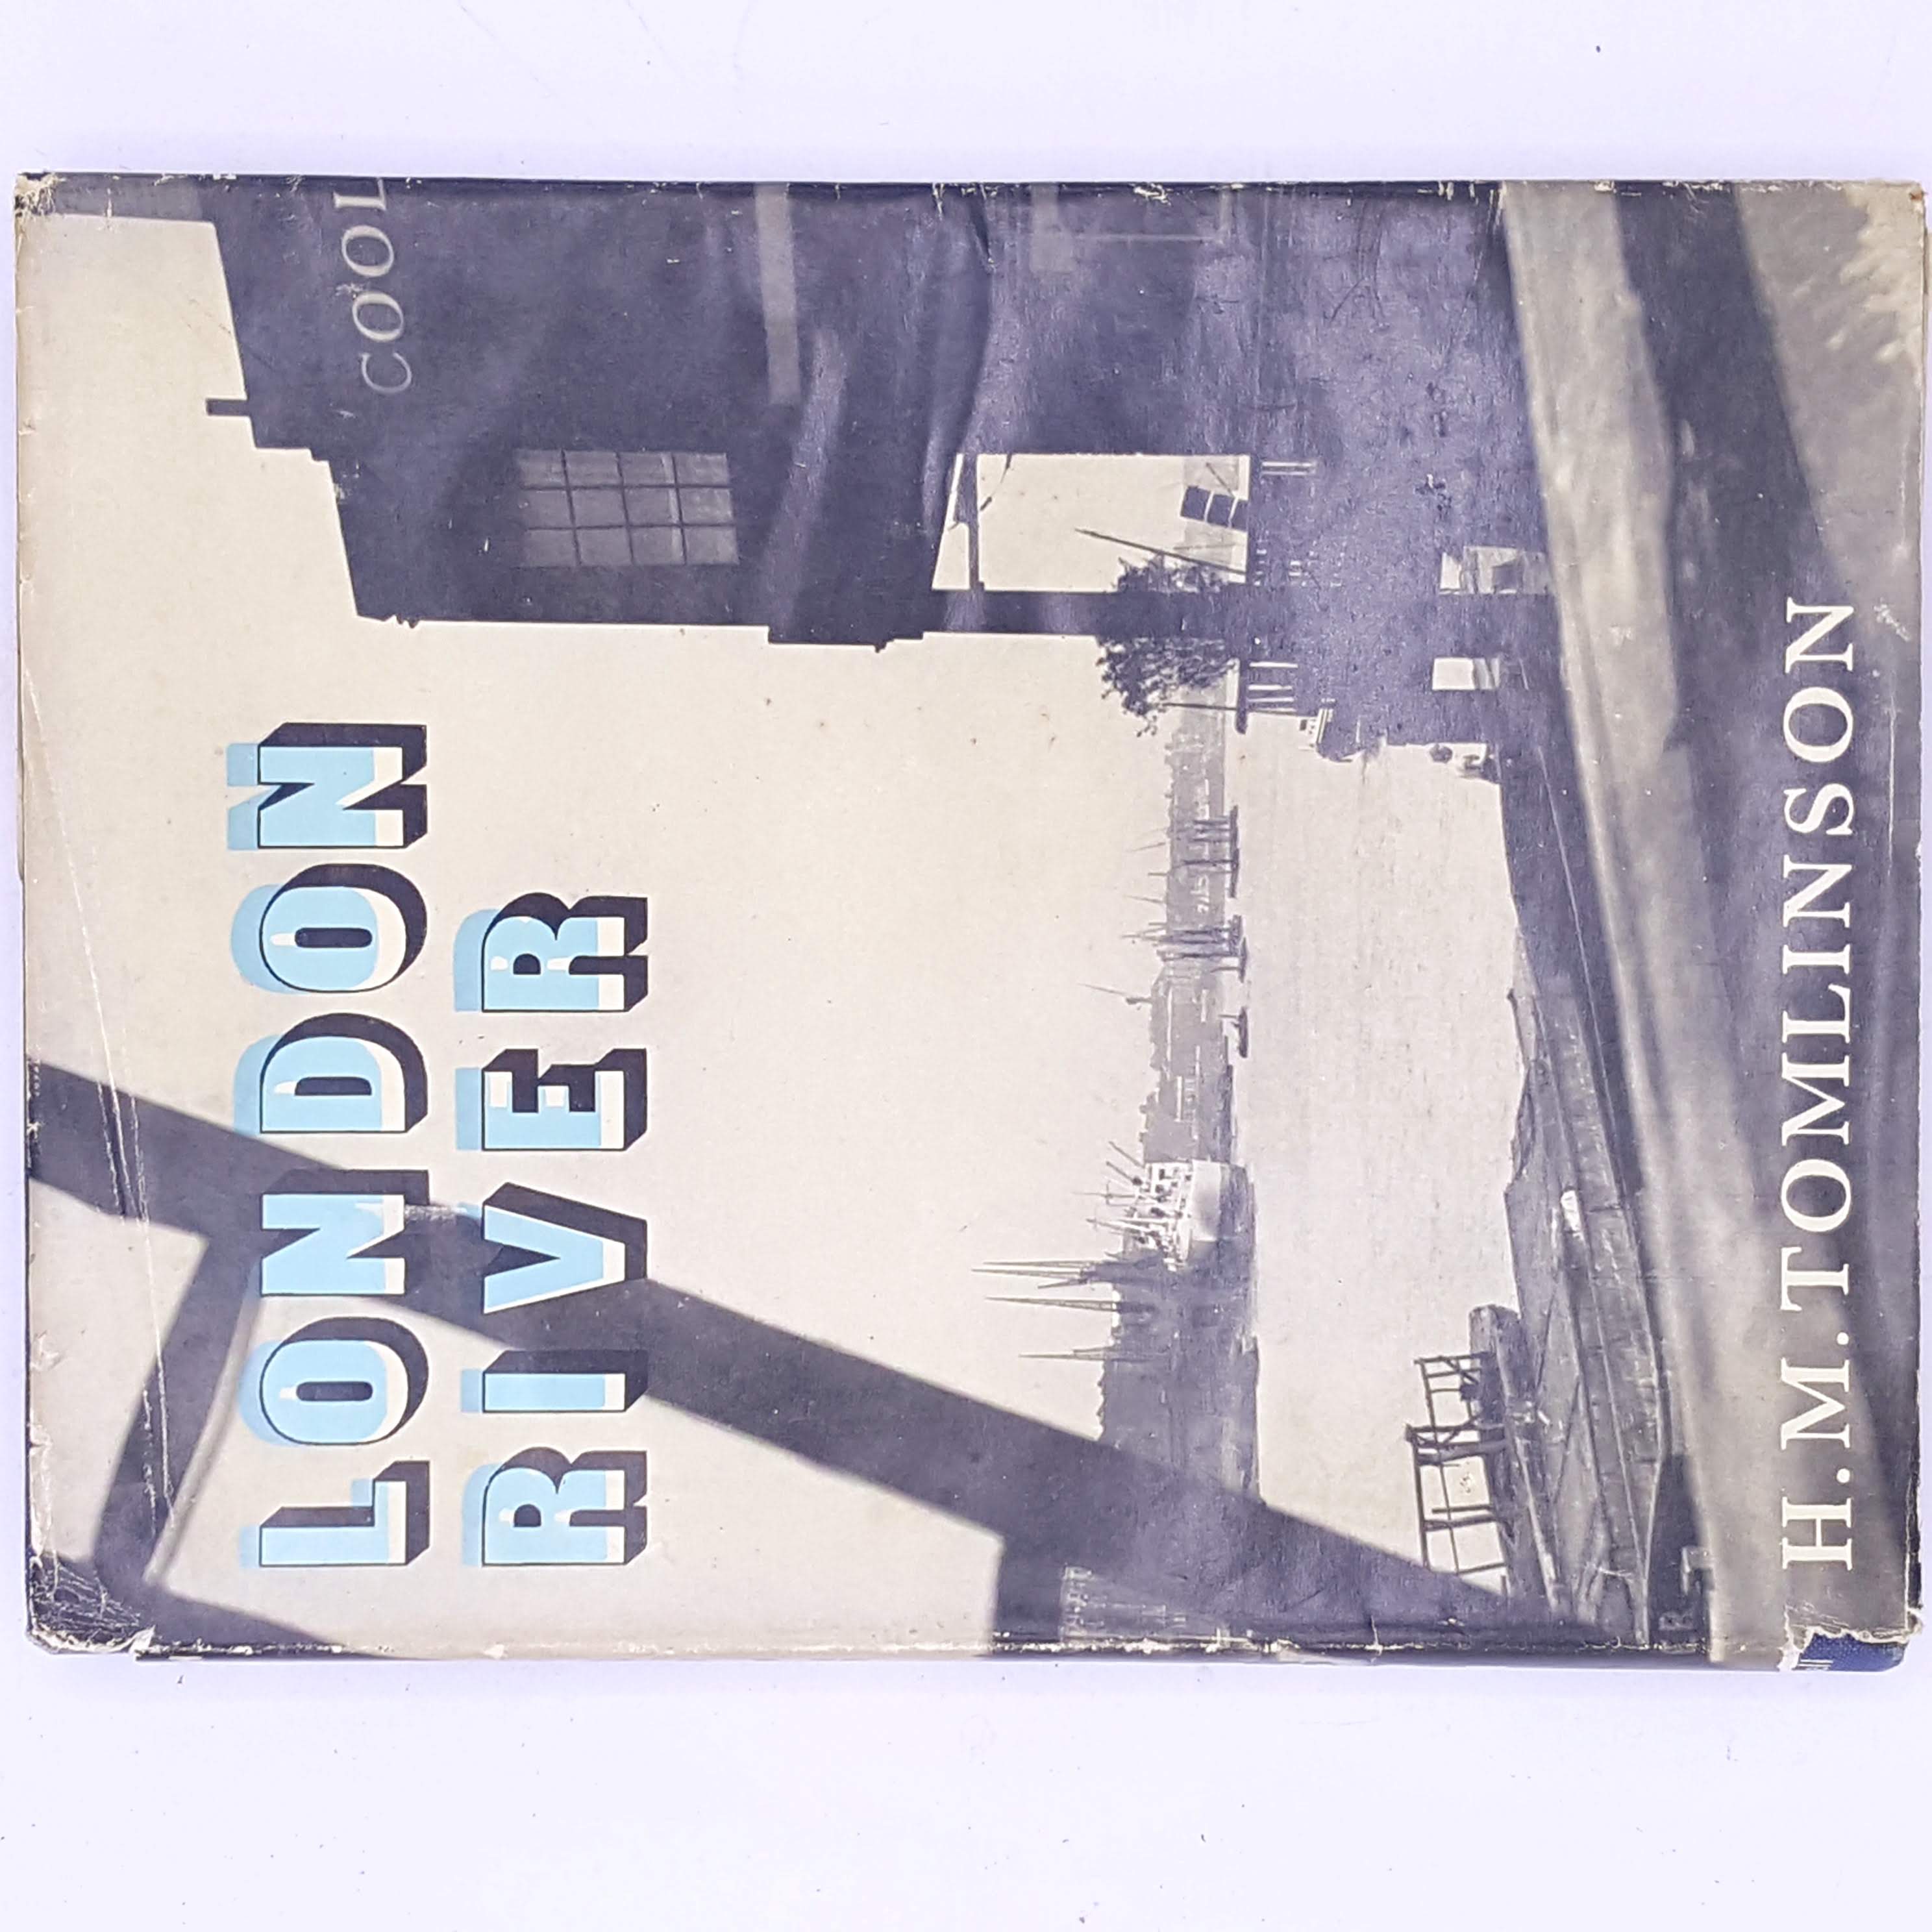 LONDON RIVER BY H.M. TOMLINSON